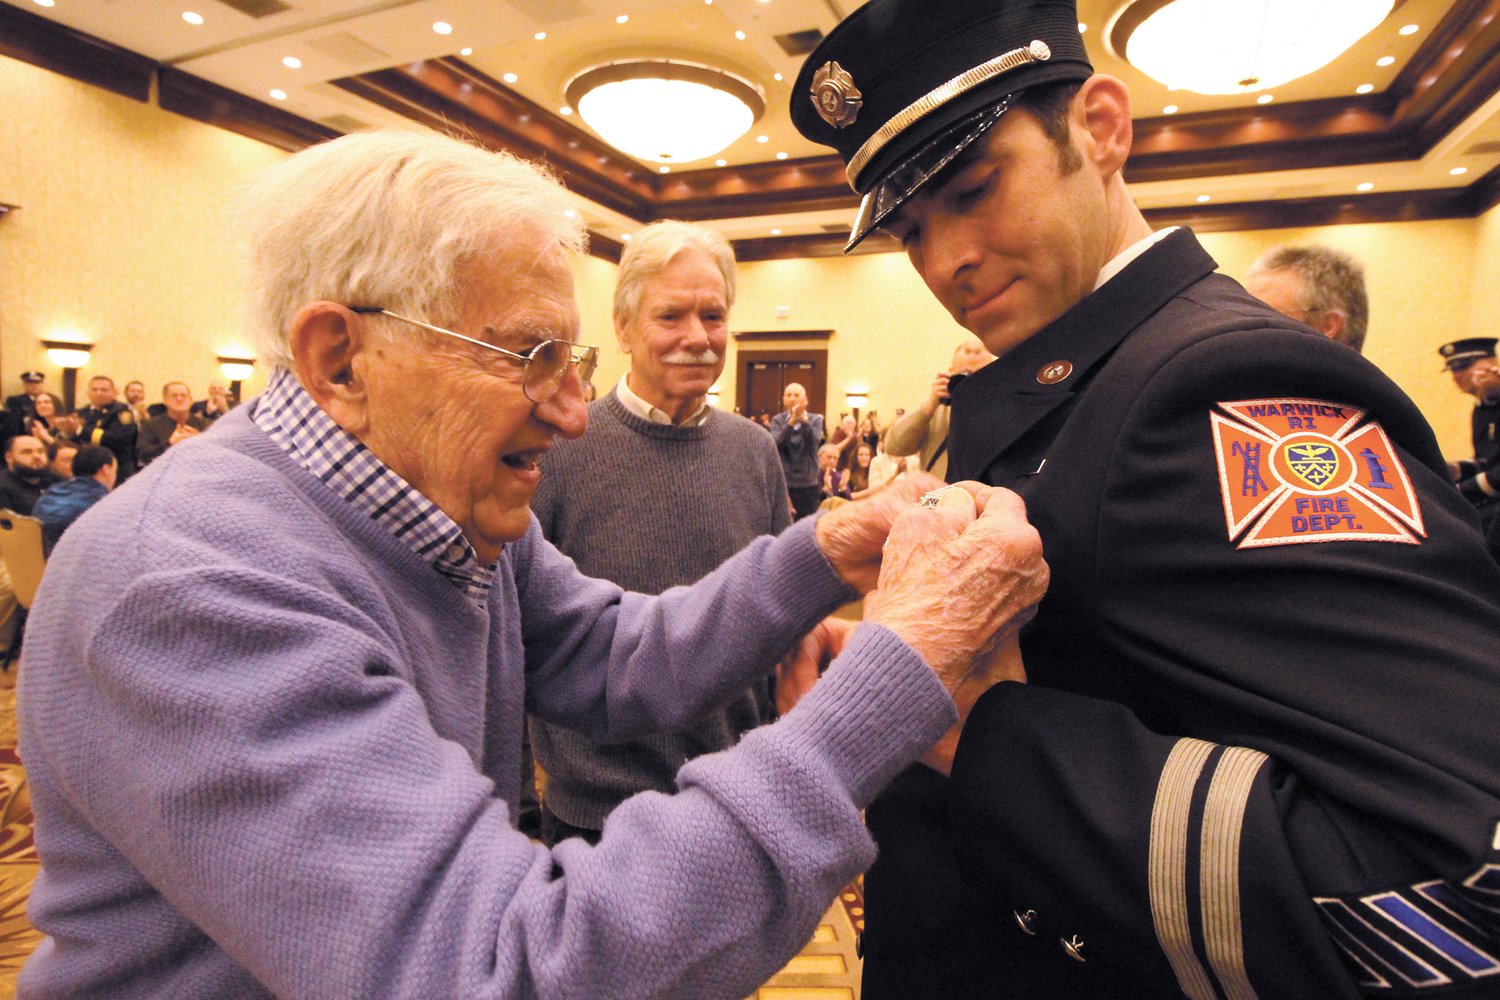 Their service applauded: More than 300 people stood to applaud when WWII veteran Maurice Roland Boulais participated in  the promotional ceremony of 21 firefighters Wednesday night at the Crowne Plaza. Boulais with his son-in law Henry Andrews standing by affixed the badge of Assistant Fire Marshal Ethan Andrews, Henry’s son. (Warwick Beacon photos)